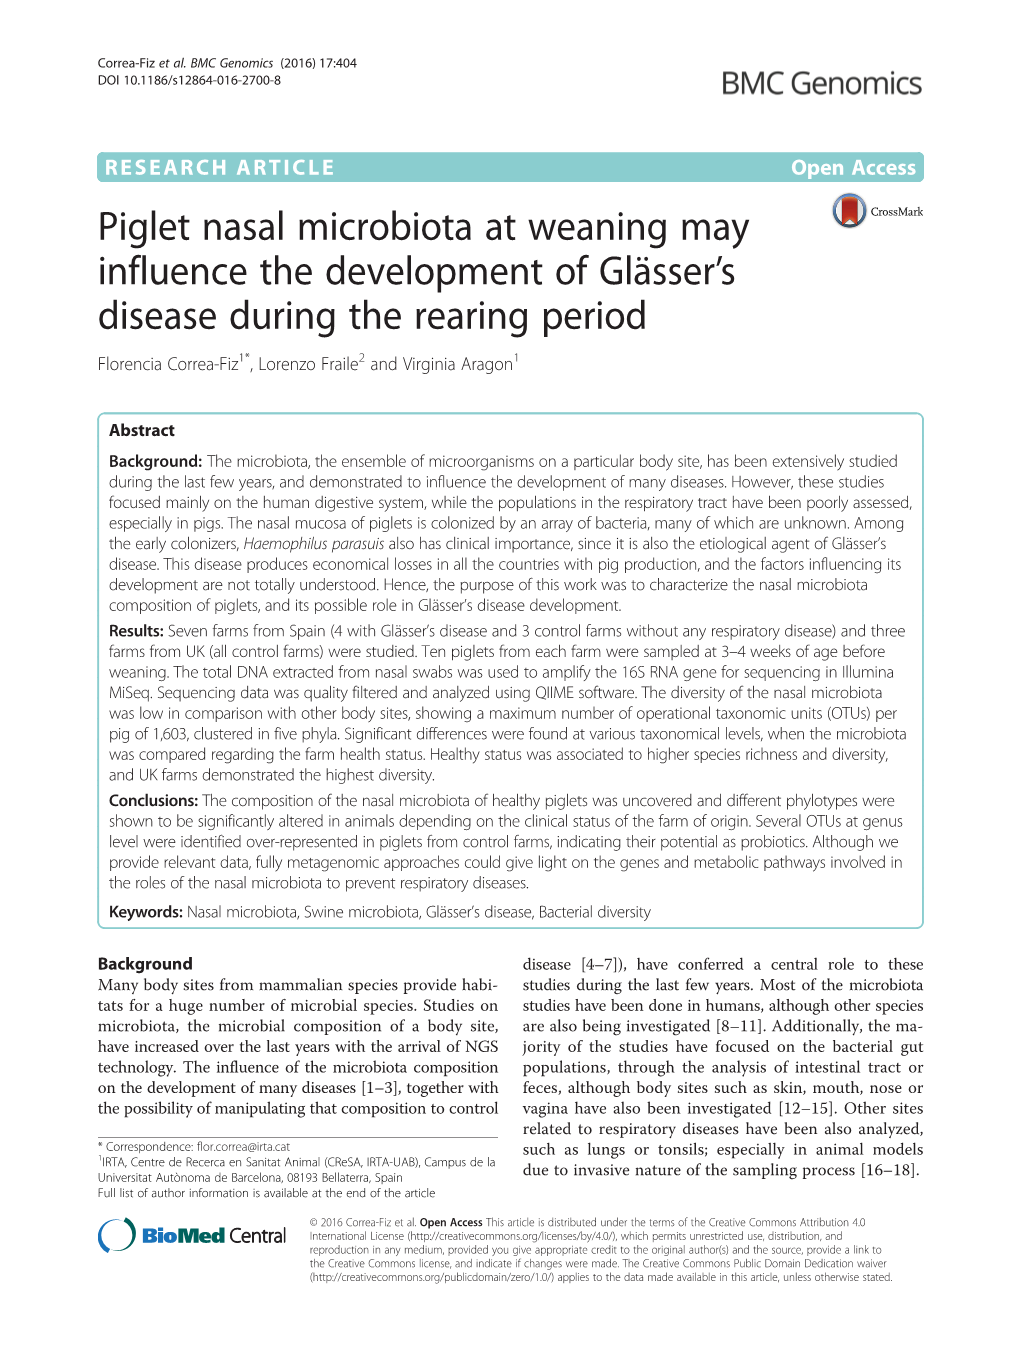 Piglet Nasal Microbiota at Weaning May Influence the Development Of